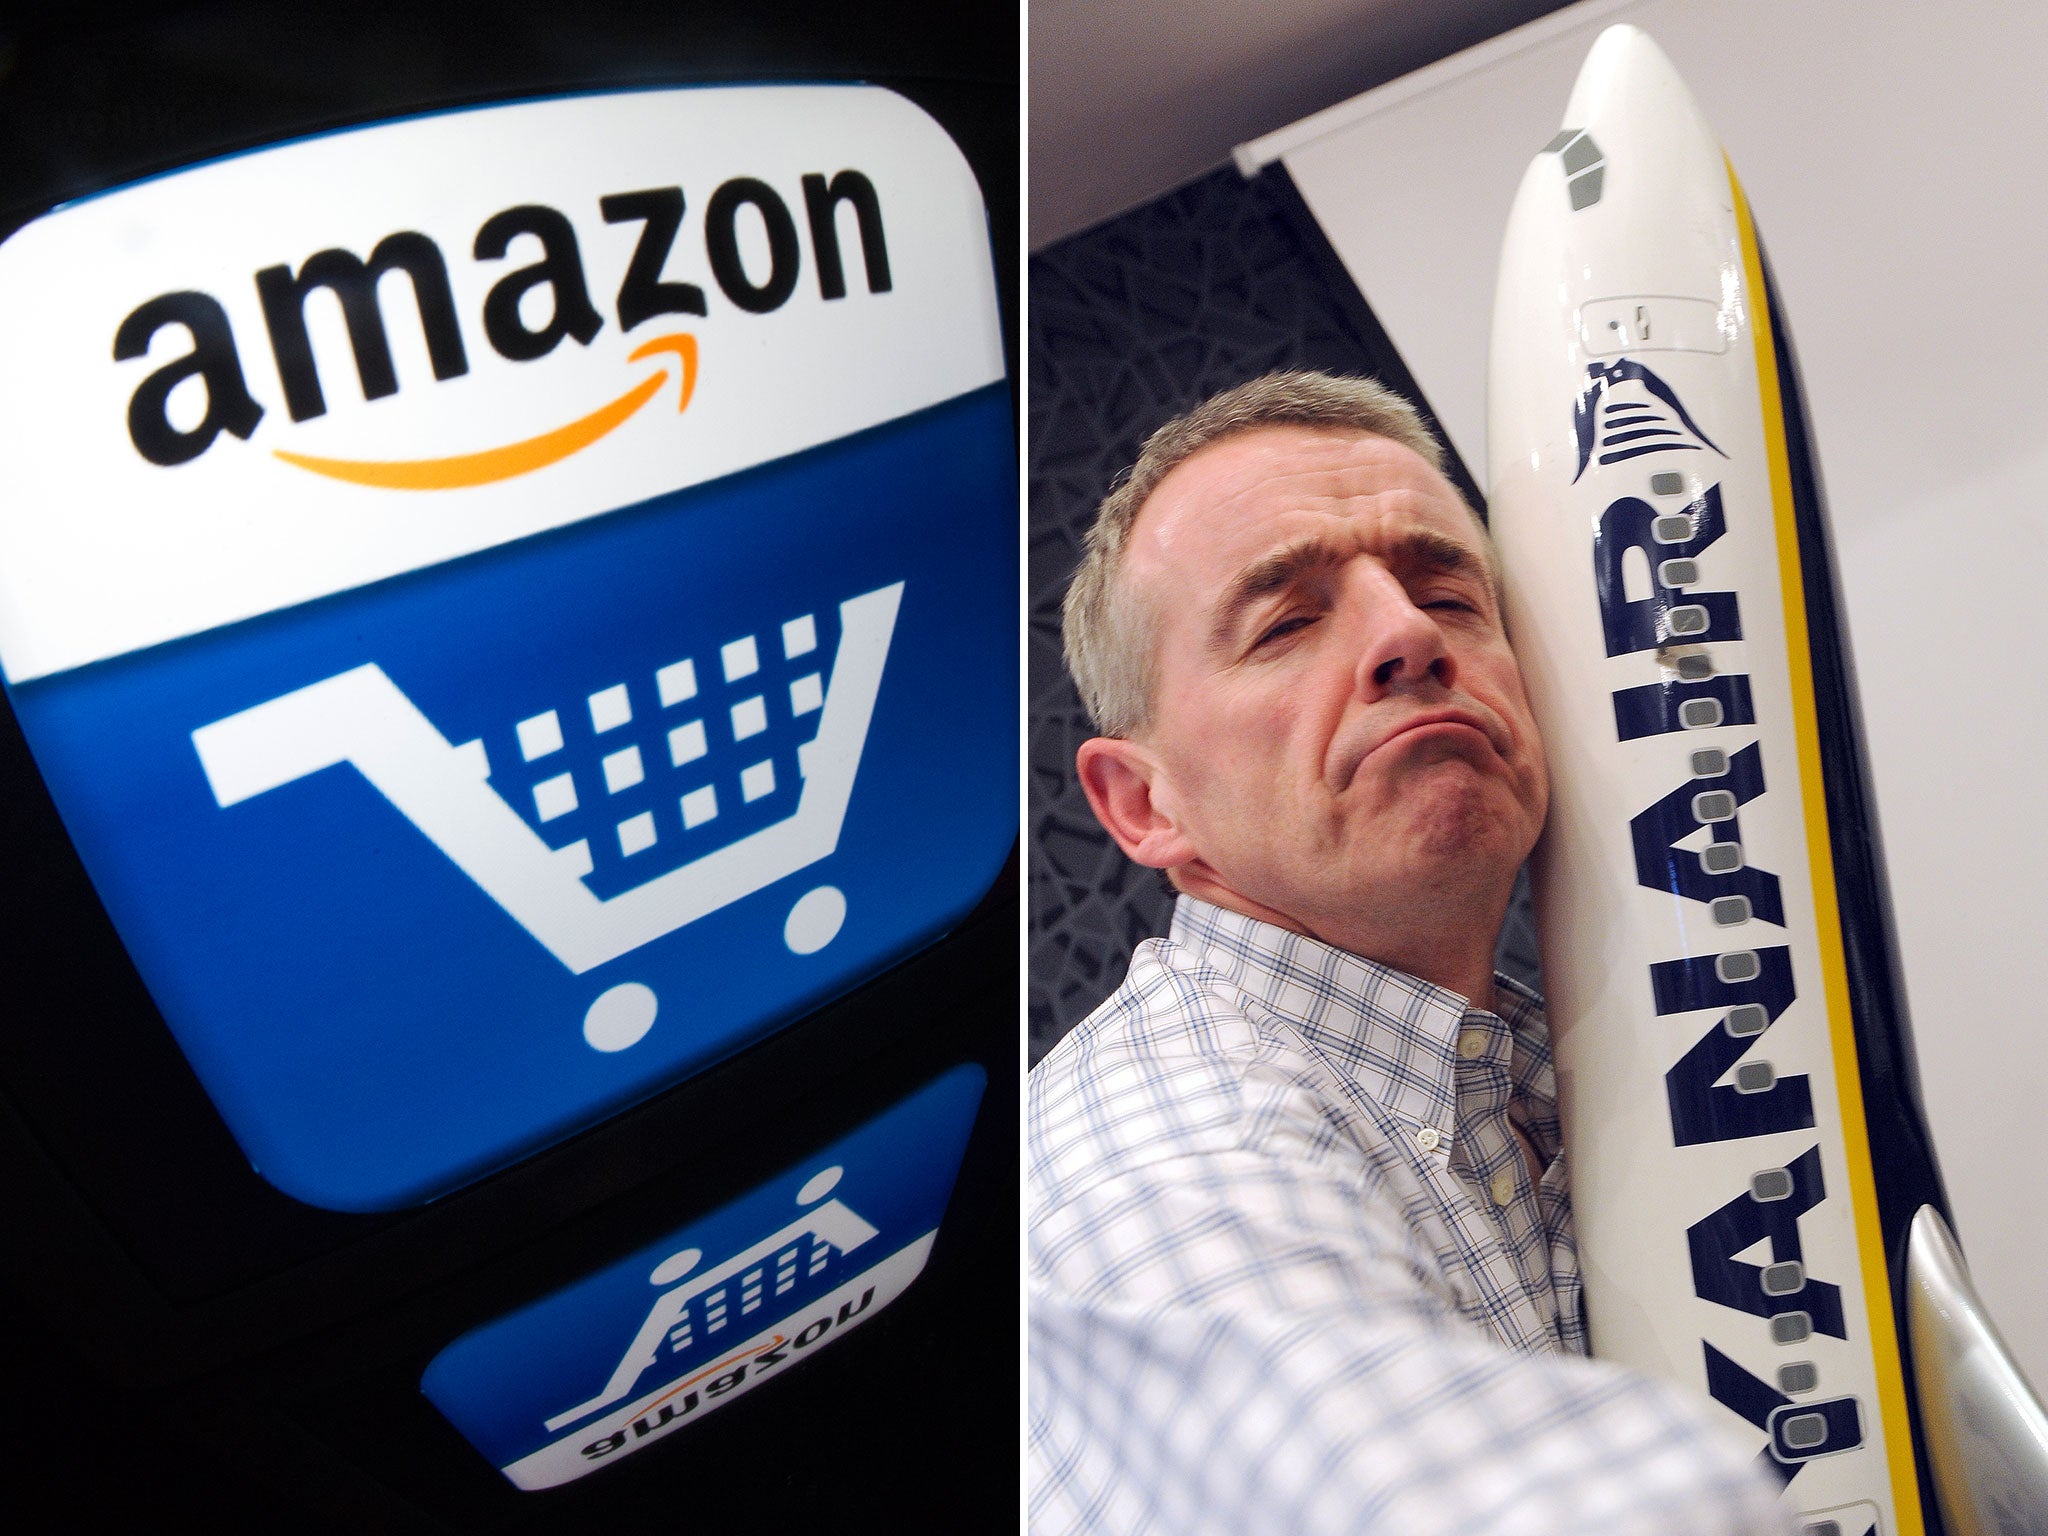 Hachette has warned that Amazon was reaching a “Ryanair moment” when customers and suppliers would become uncomfortable with the way that the company operates